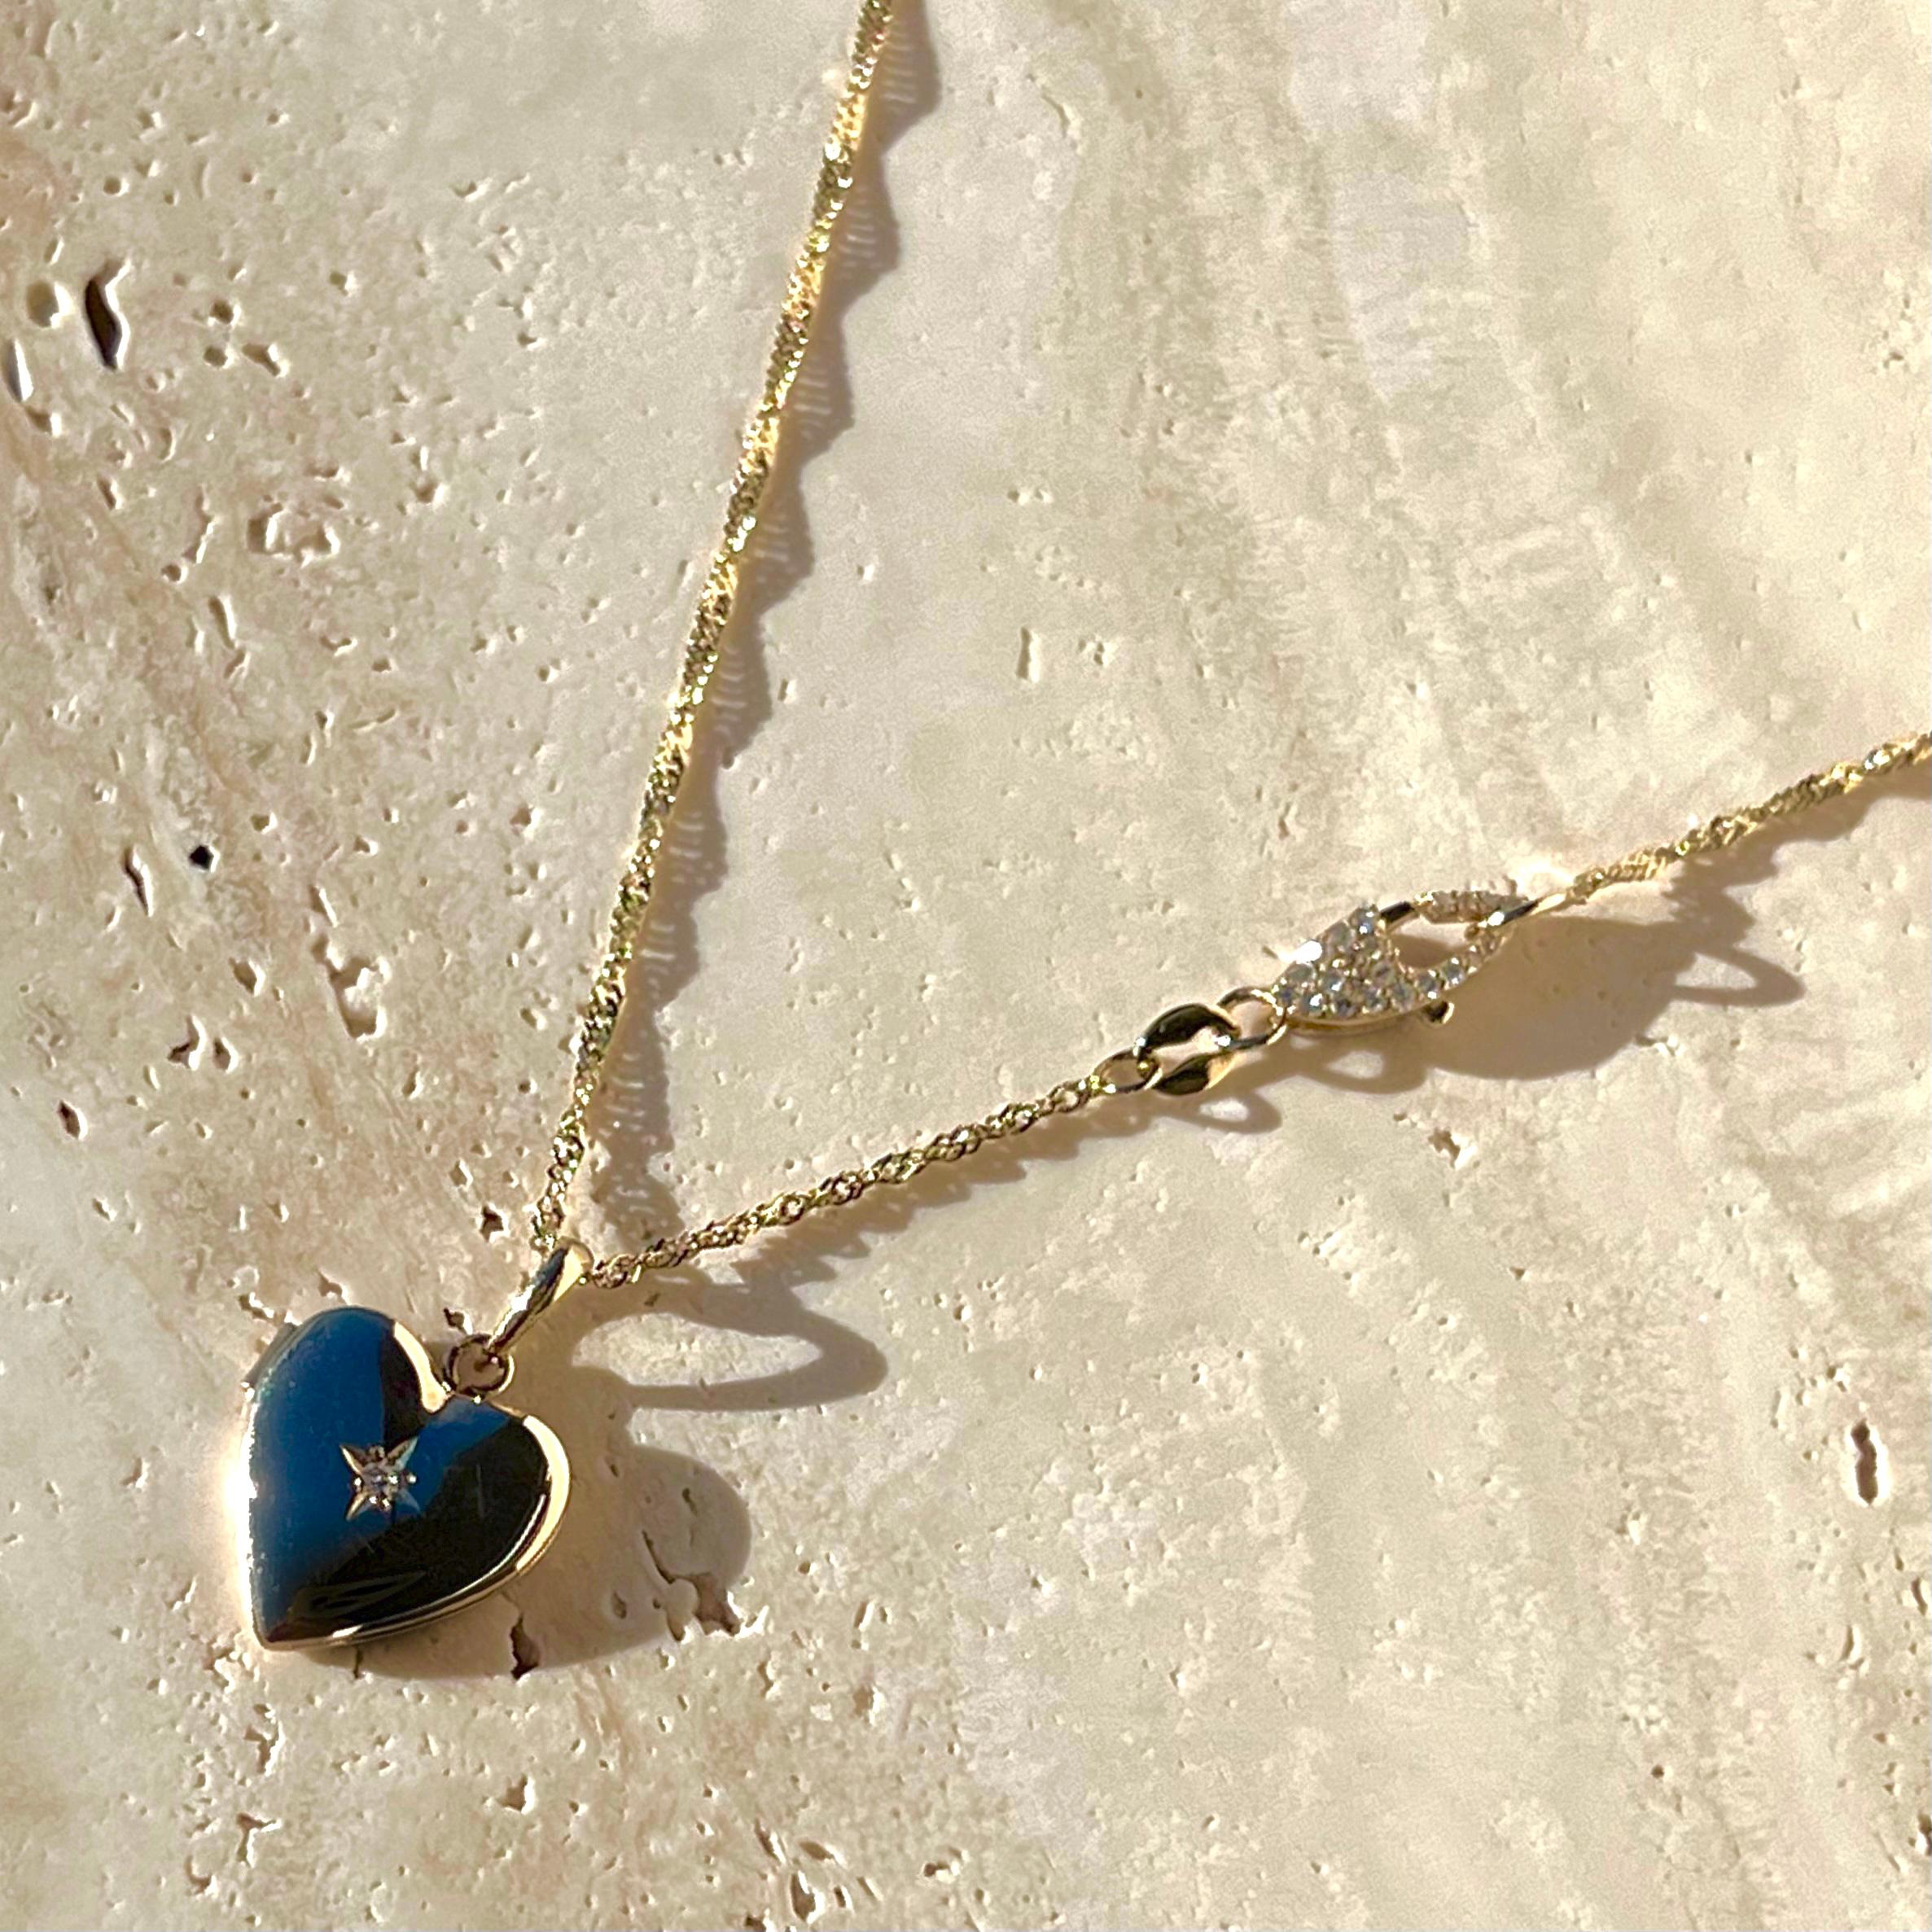 A vintage 14k gold and star set diamond heart locket from the 1960s/1970s. Paired with a custom pavé double-sided diamond clasp and solid 14k gold singapore chain. The pendant is a vintage piece in great condition and the chain is new. Can be styled